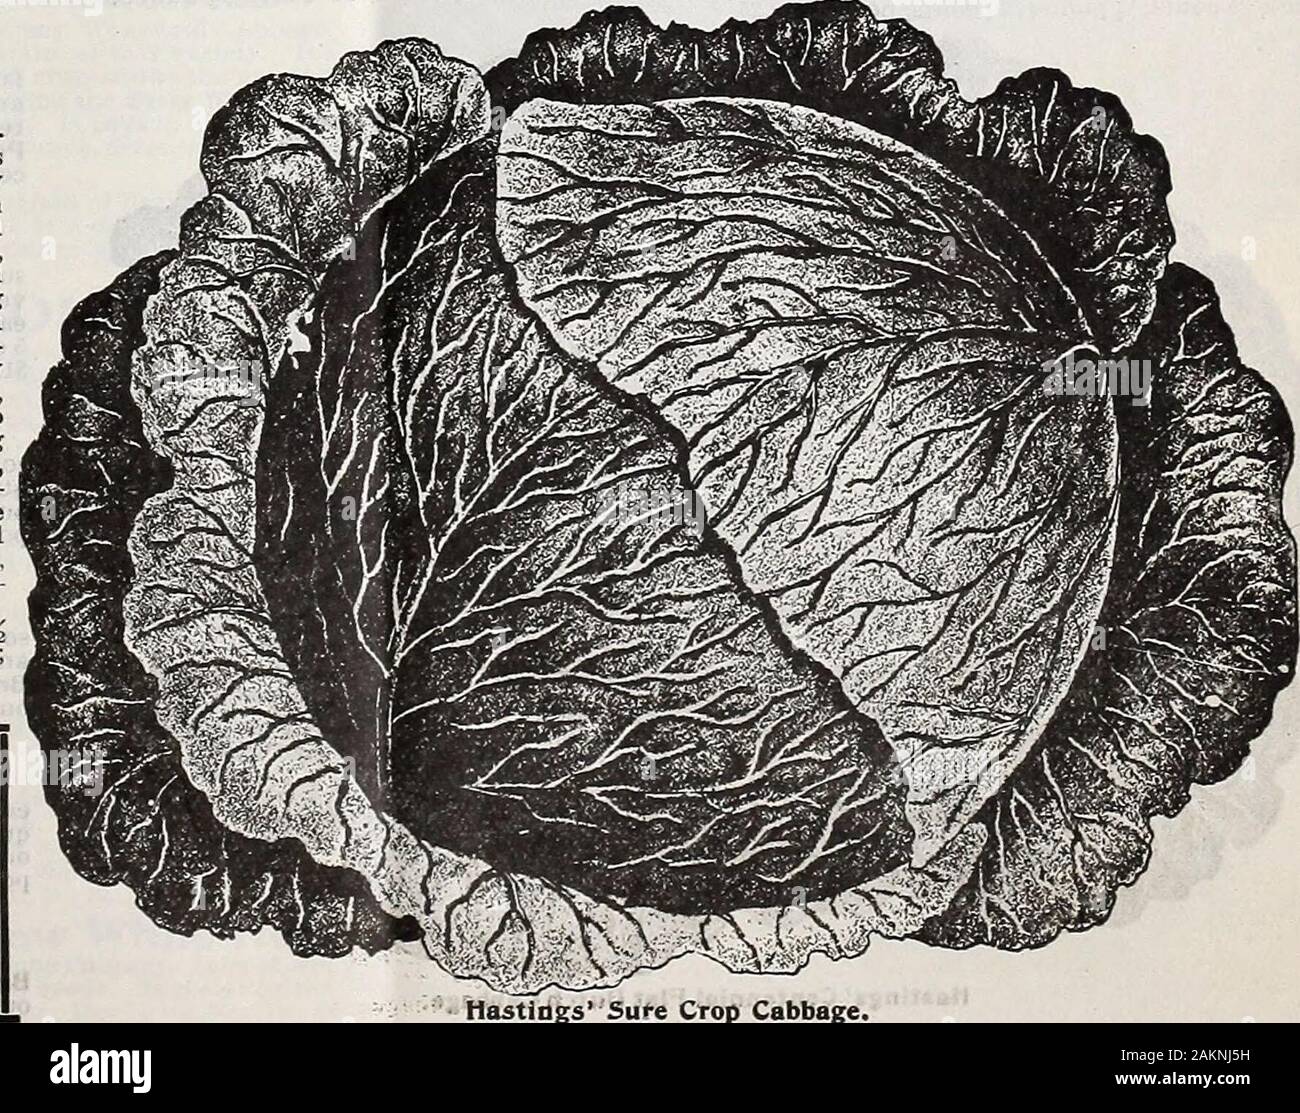 H.GHastings & Co: spring 1907 catalogue . Hastings Long* Island Wakefield Cabbage. Hastings Long Island Wakefield Cabbage s^Tel&fofaTy of the large Wakefield strains. Earlier, larger and finer bred than any of the strains of CharlestonWakefield. One and a half to two pounds heavier, firmer, better shape and more solid than theEarly Jersey Wakefield. In good soil and with favorable waather conditions it is often ready foruse in 50 days from transplanting. It is a gem for those desiring a first-class pointed cabbage, andmakes a splendid first early cabbage for family use. Premier Brand Seed—Pack Stock Photo